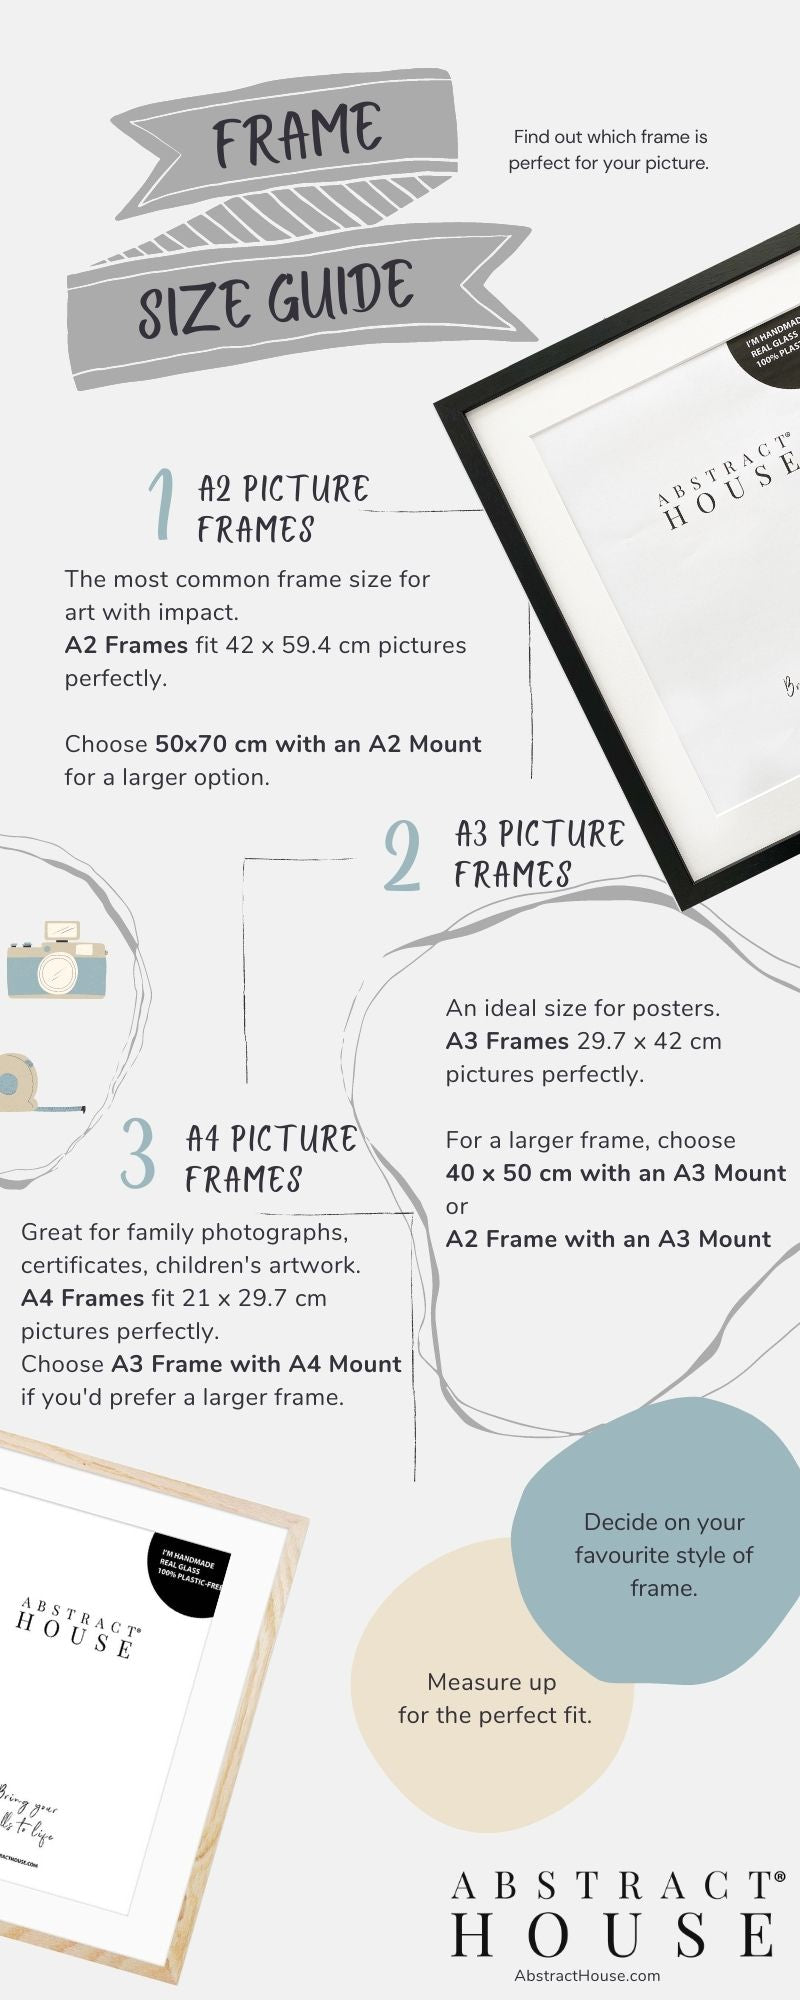 Frame and Photo Sizes from Inches to cm